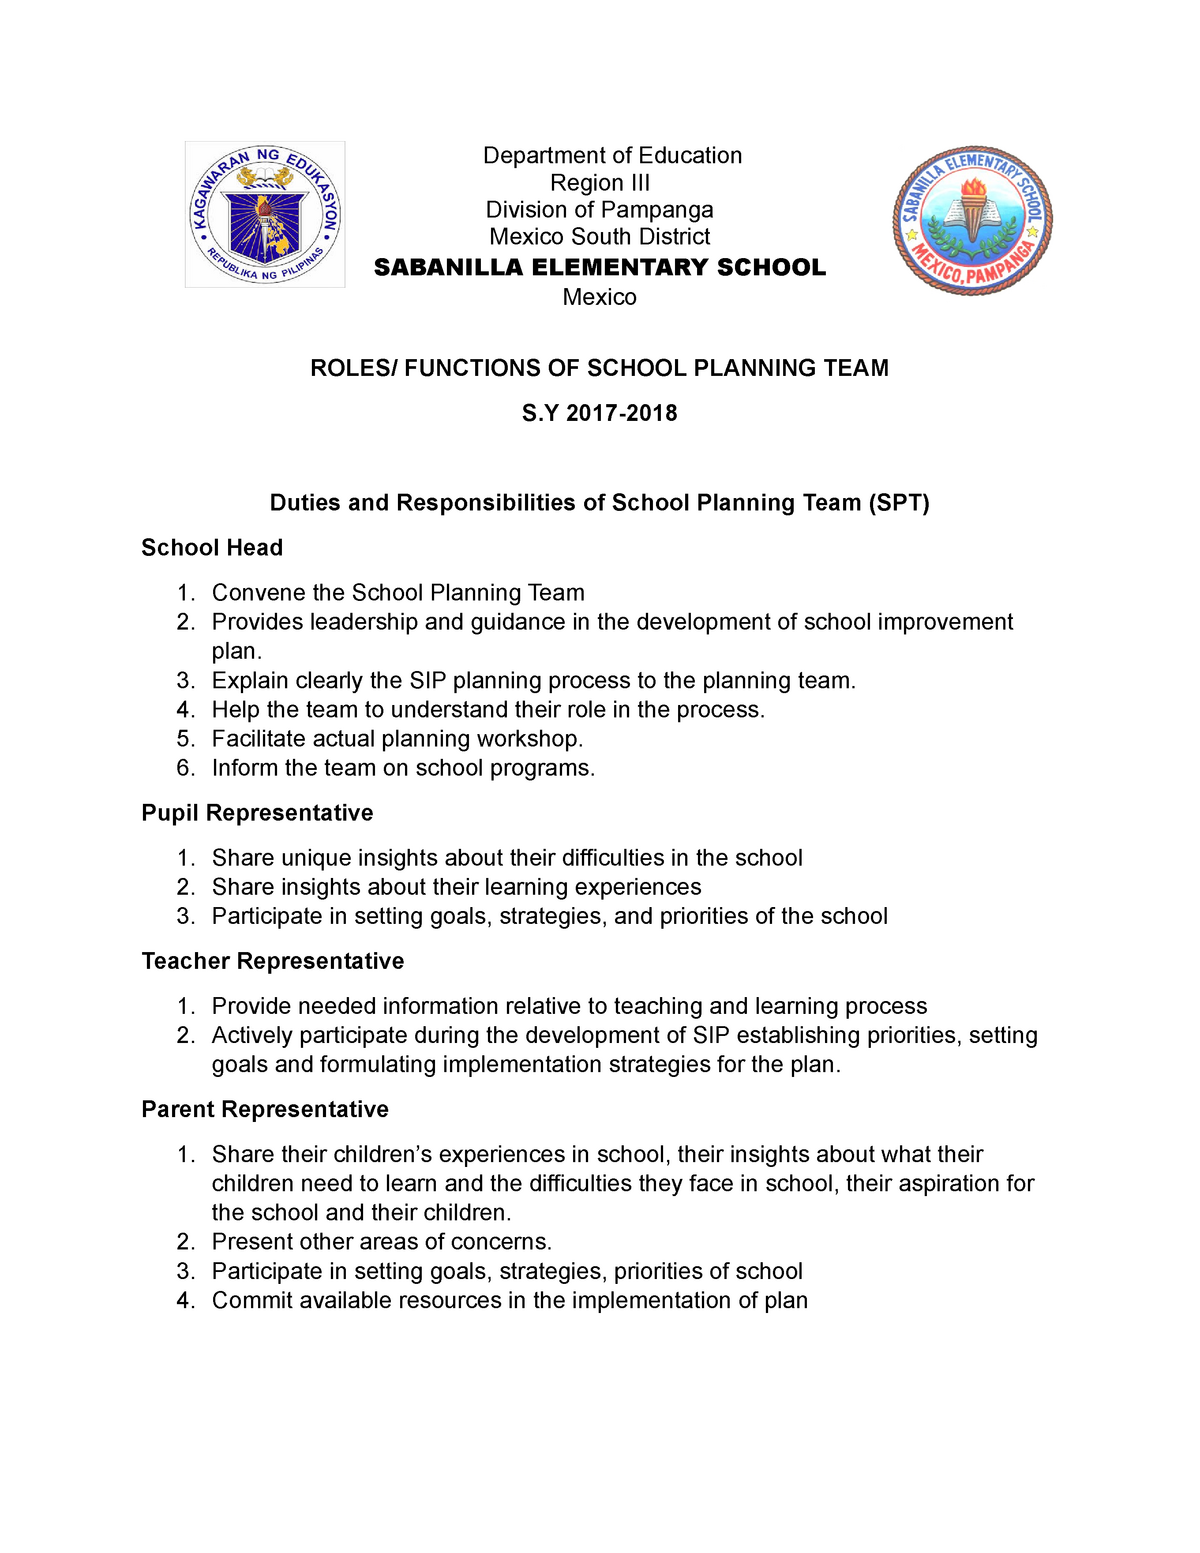 Roles And Function Spt 2017-2018 - Department Of Education Region Iii  Division Of Pampanga Mexico - Studocu